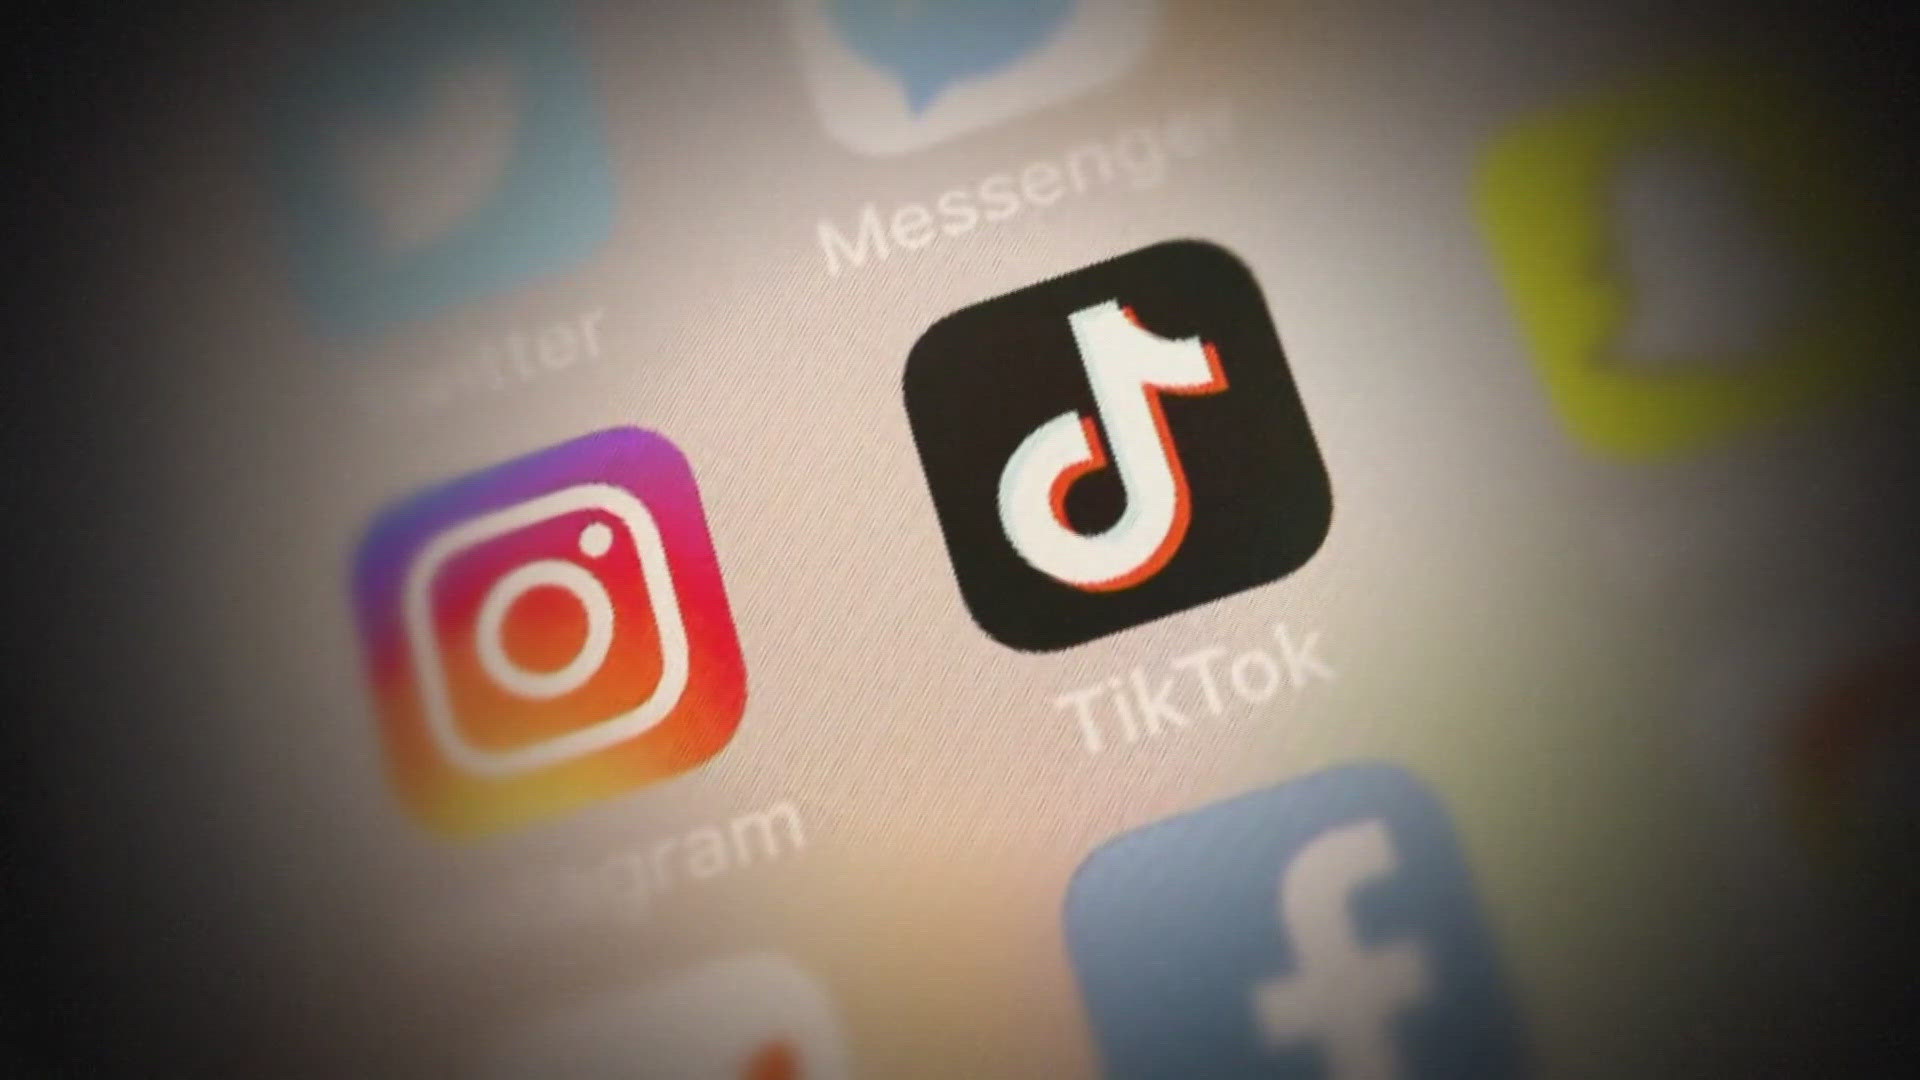 TikTok says the app will cover the groups legal expenses.